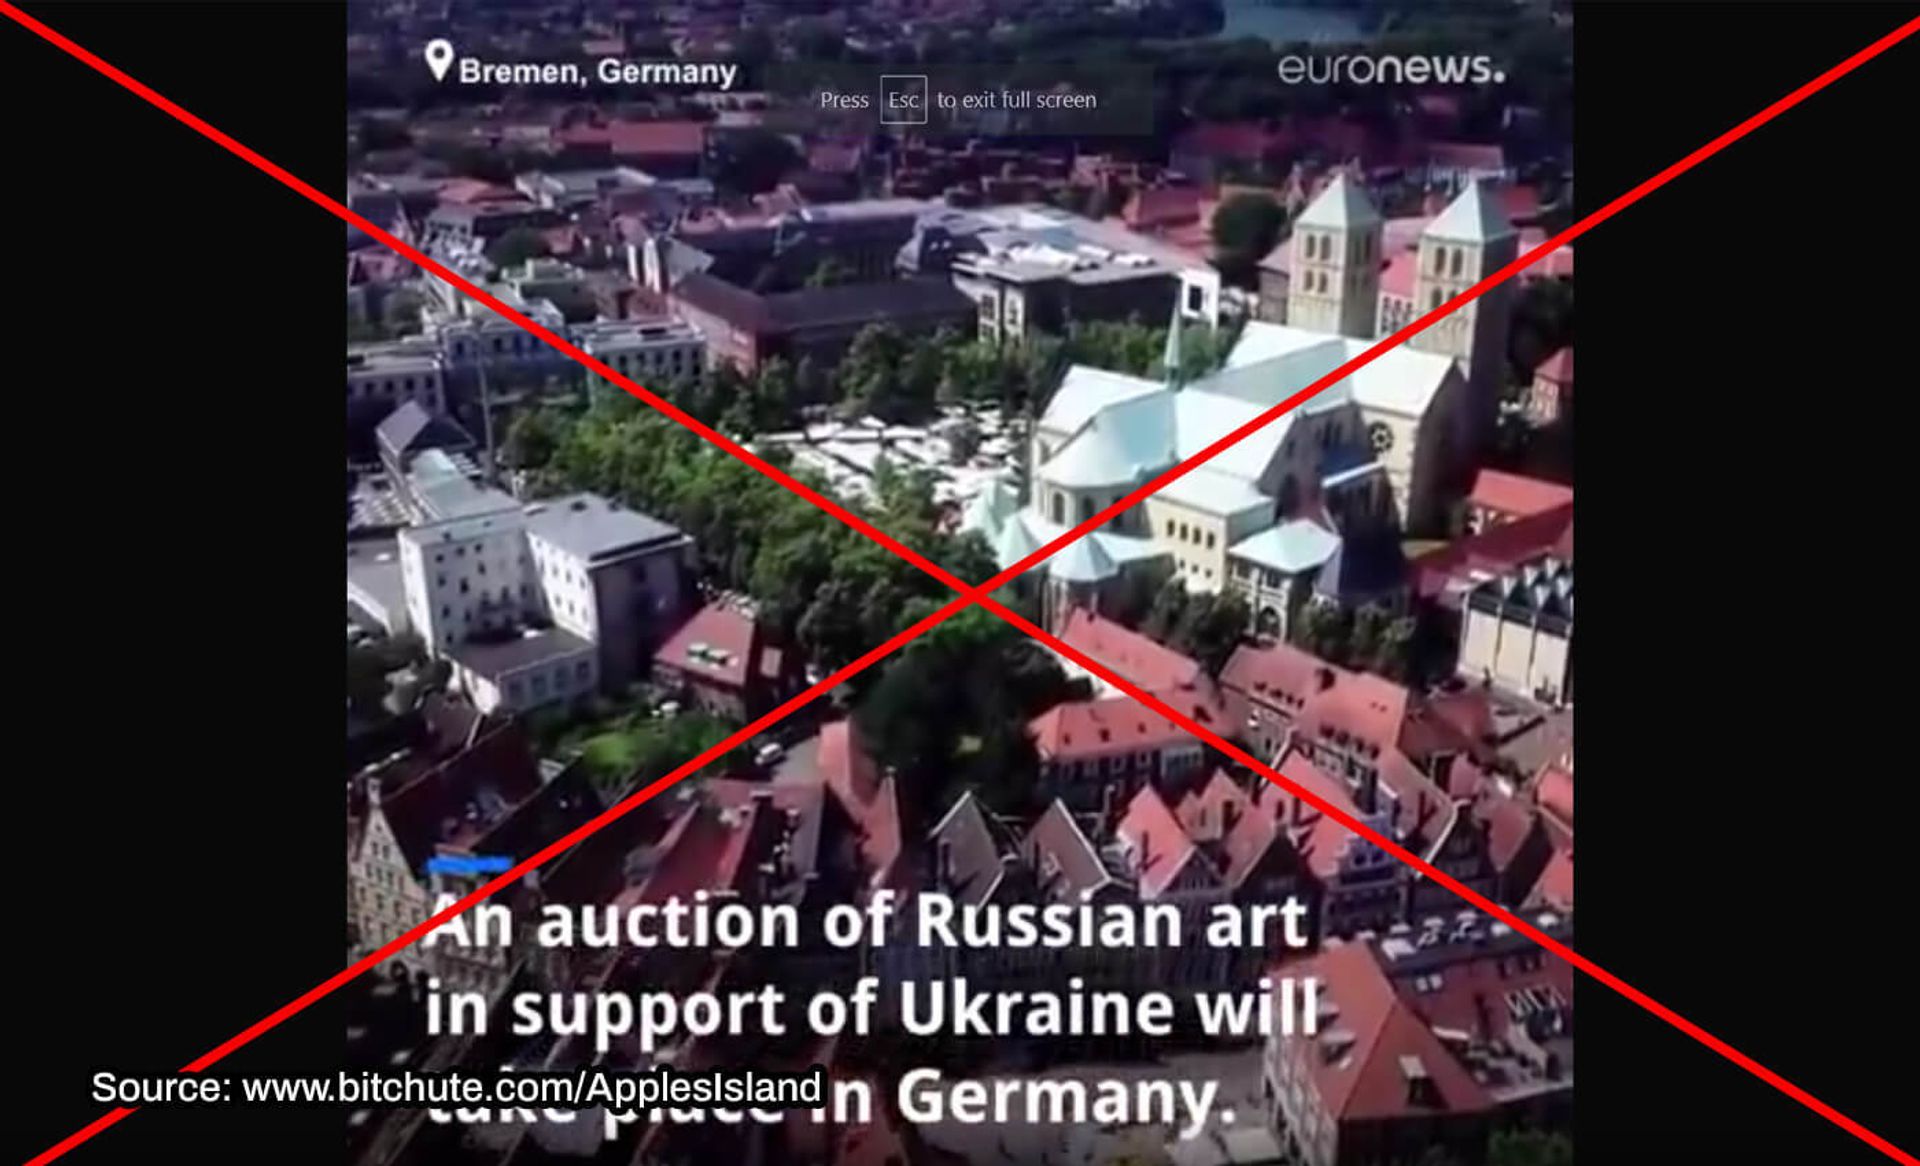 A screenshot of the video that falsely claims Bolland & Marotz auction house will sell, and then destroy, Russian art. 